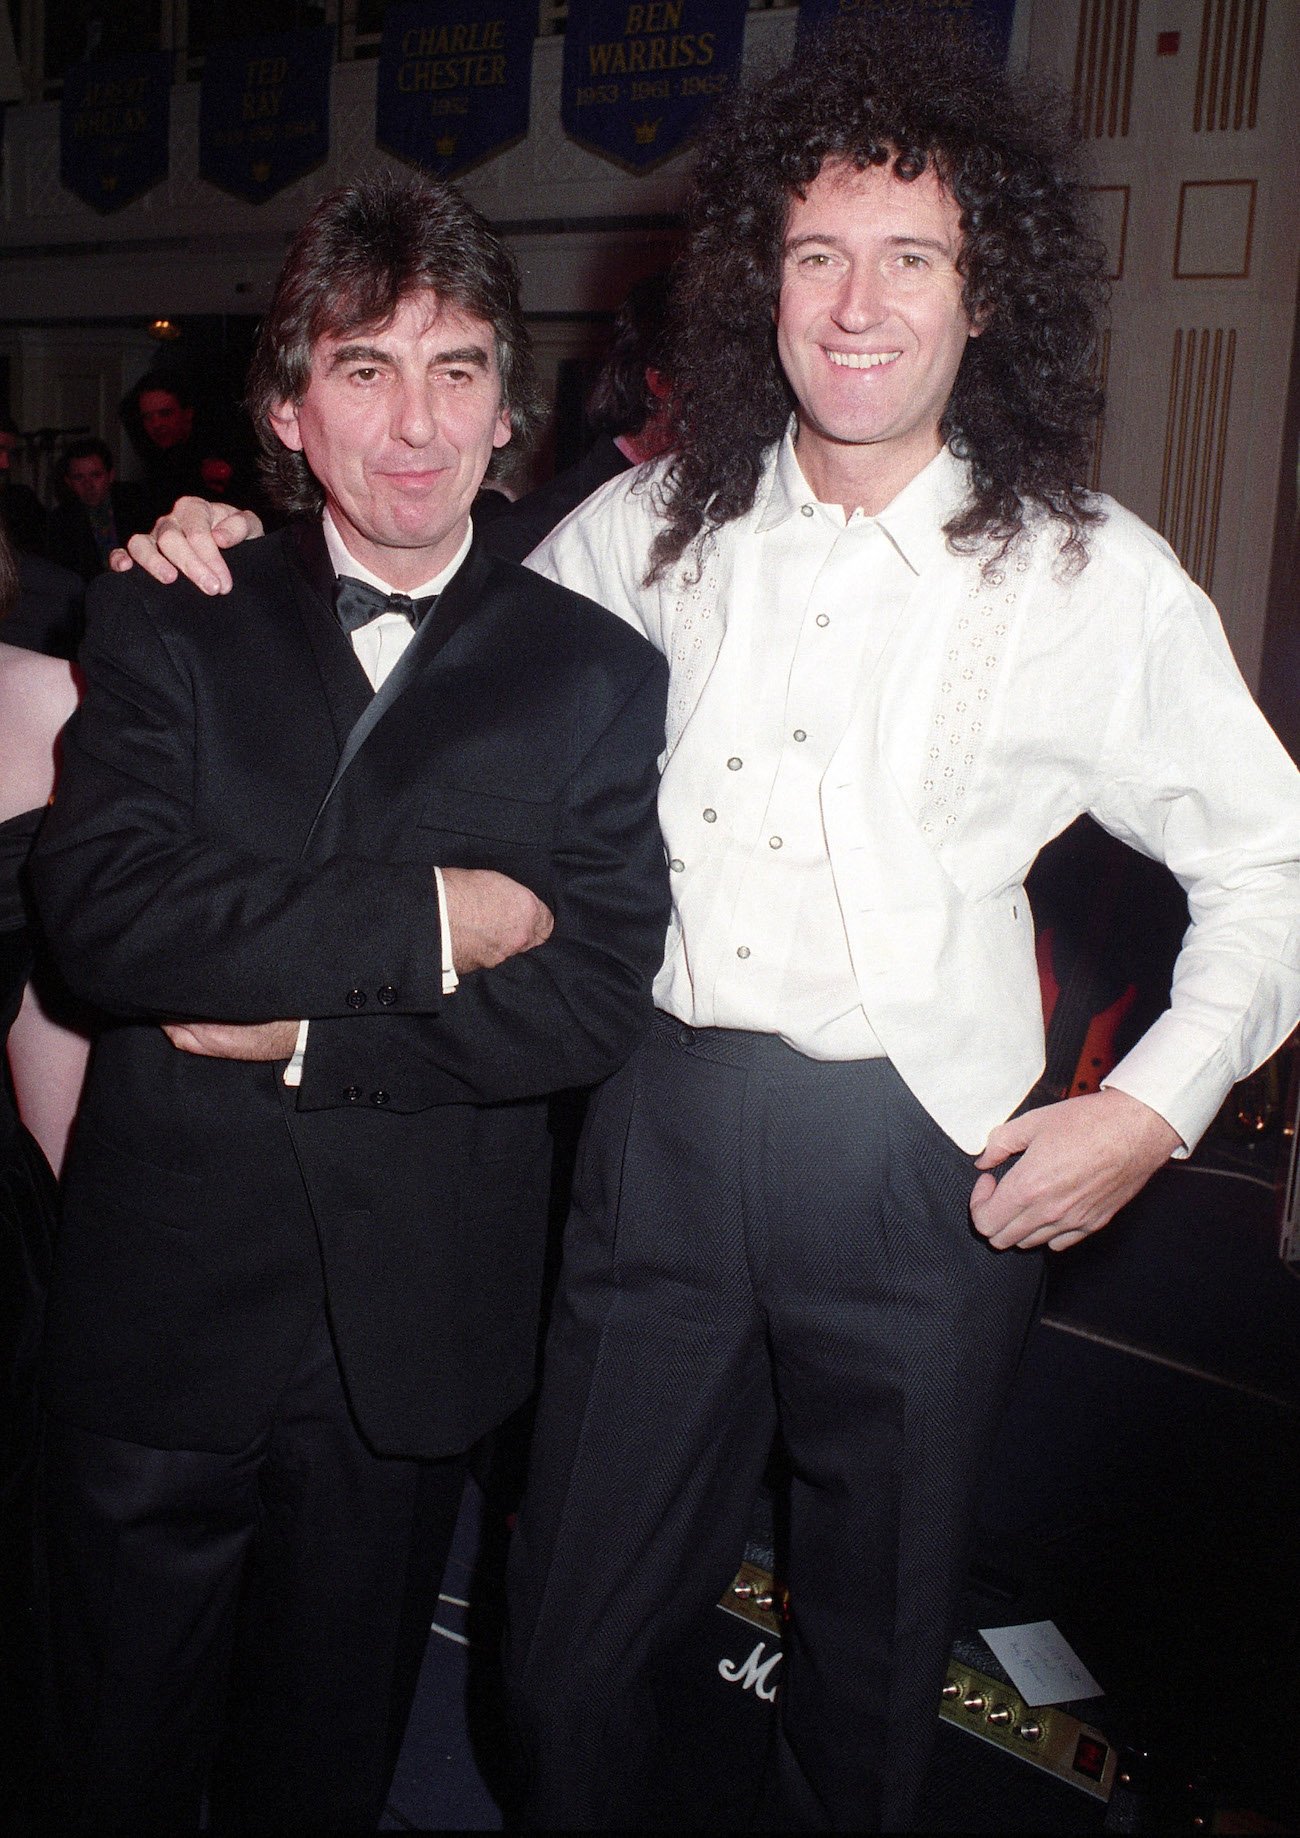 Queen's Brian May Said the Guitar Community Underrated George Harrison